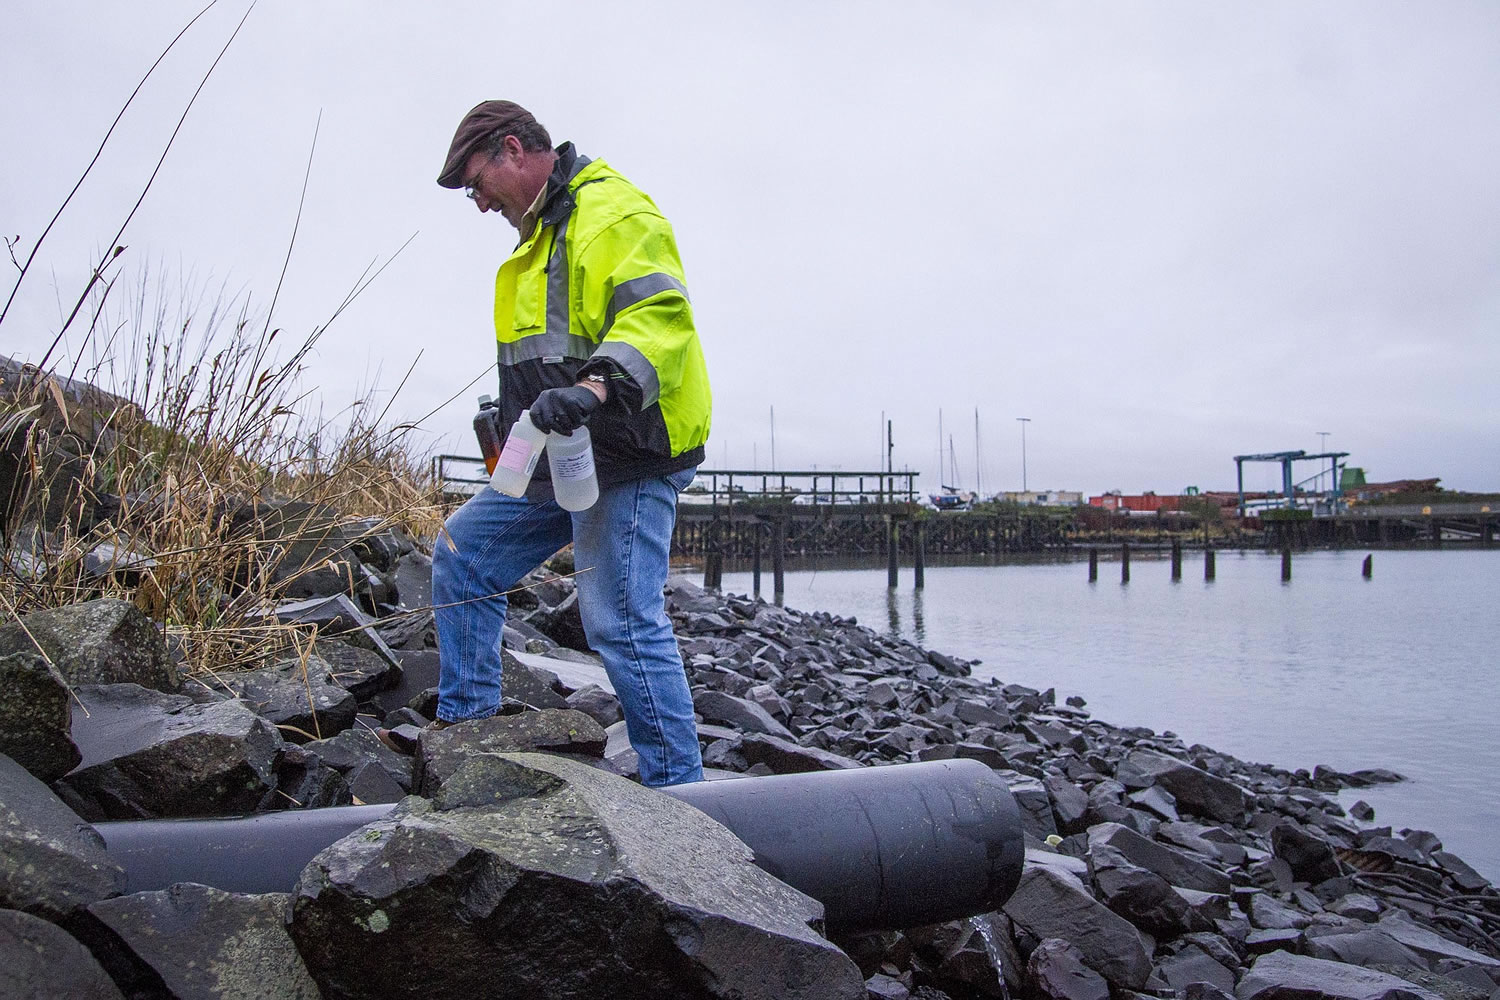 Robert Evert, permit and project manager for the Port of Astoria, collects samples along Pier 2 in Astoria, Ore.